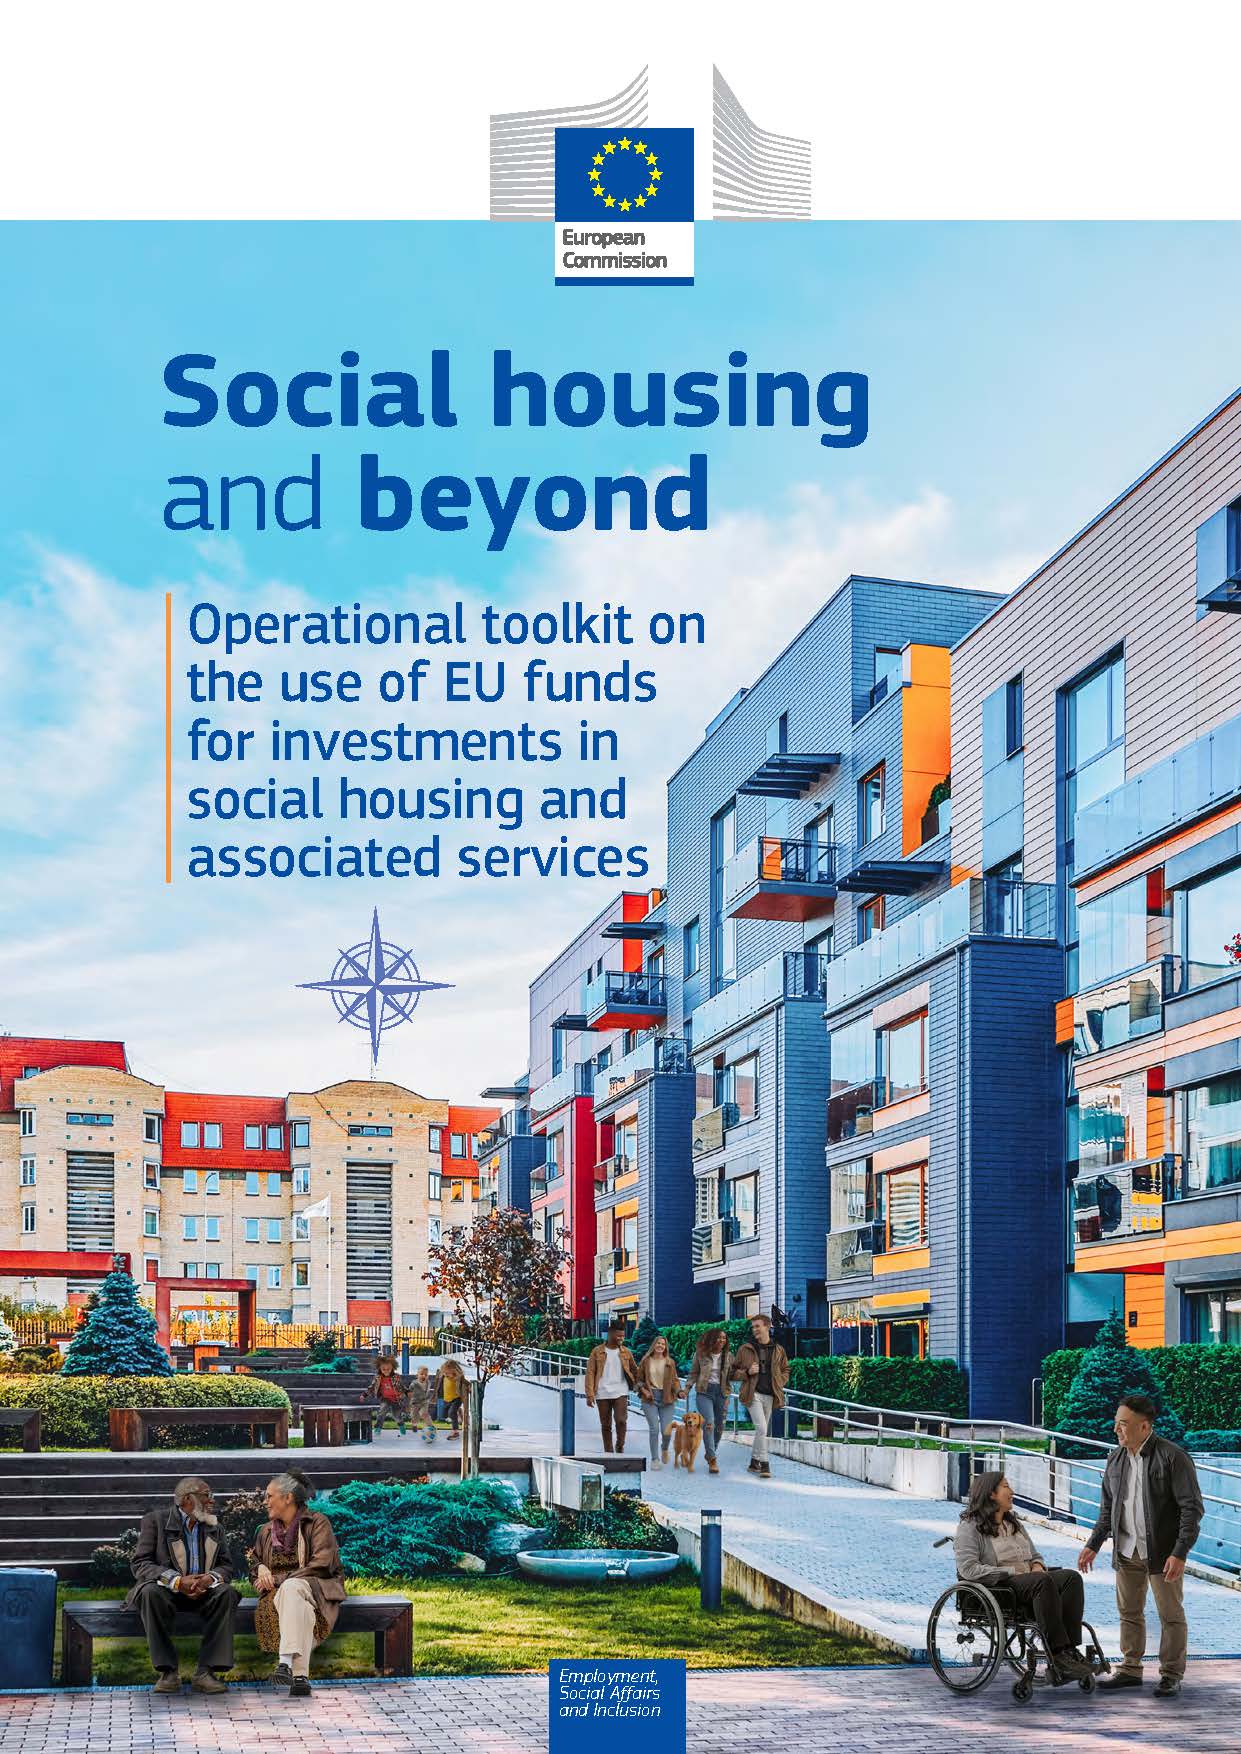 Social housing and beyond -
Operational toolkit on the use of EU funds for investments in social housing and associated services